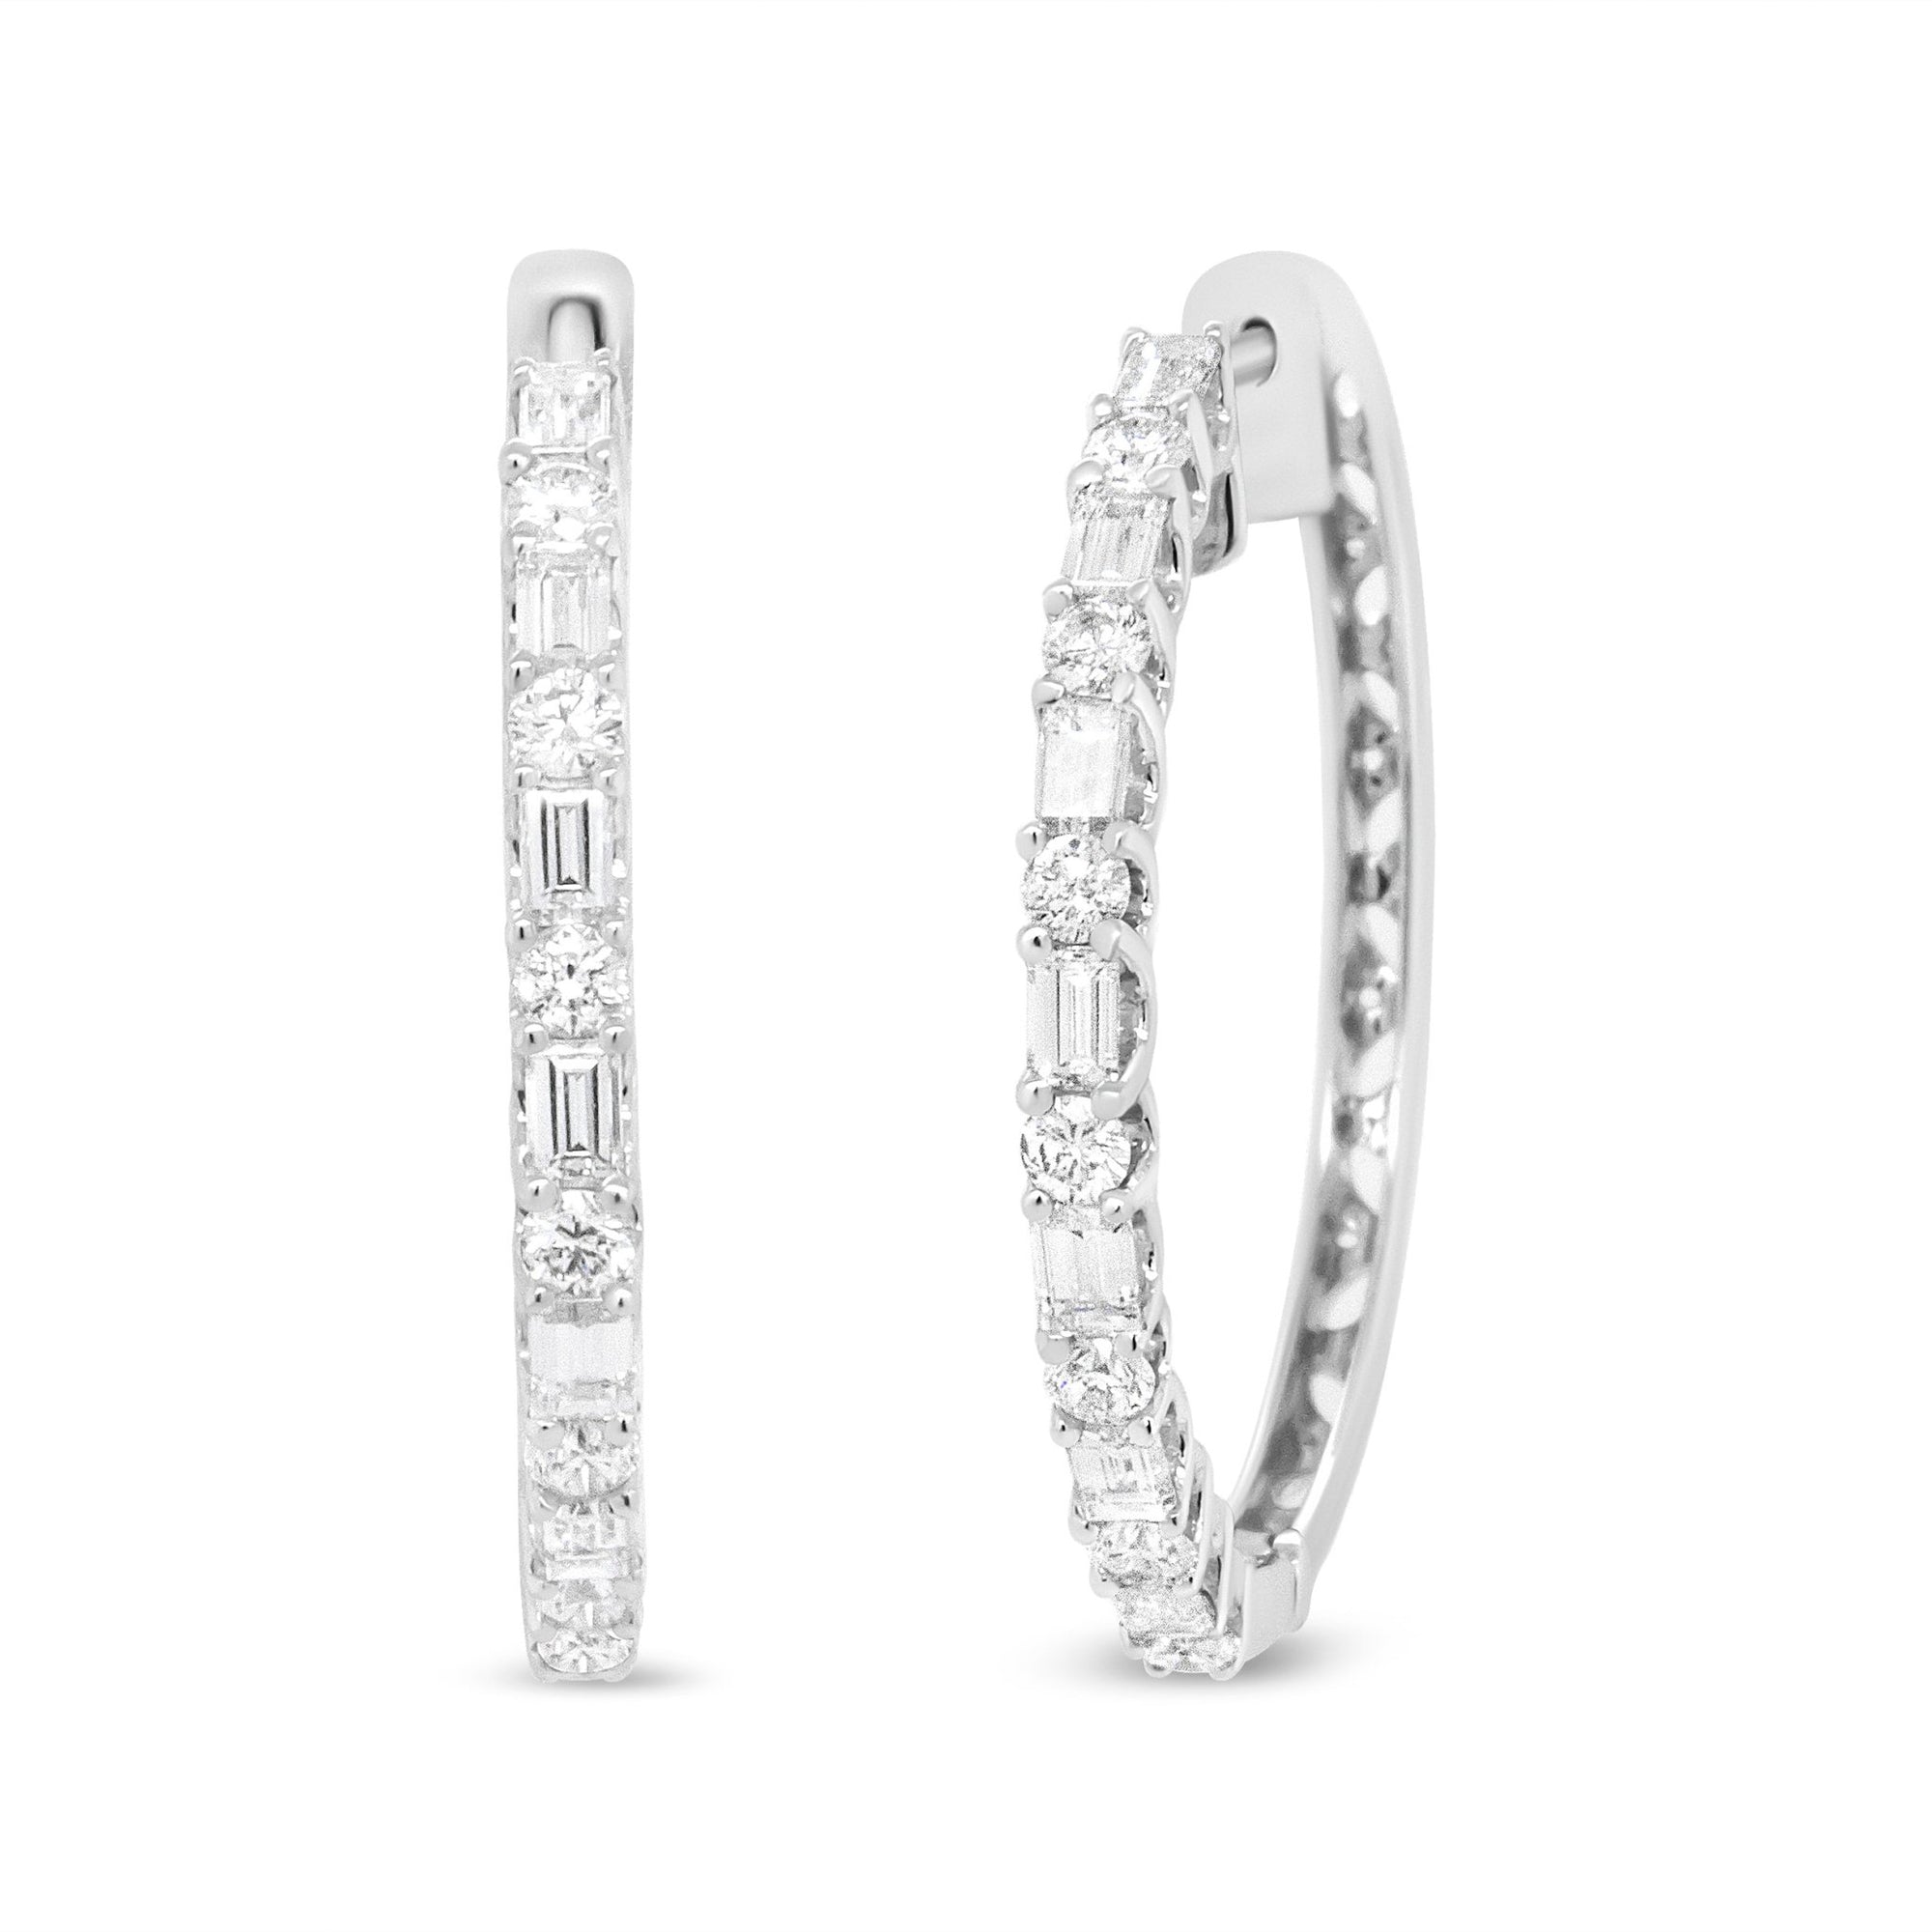 14K White Gold 1 3/4 Cttw Round and Baguette Diamond Hoop Earrings - (H-I Color, SI2-I1 Clarity) - LinkagejewelrydesignLinkagejewelrydesign